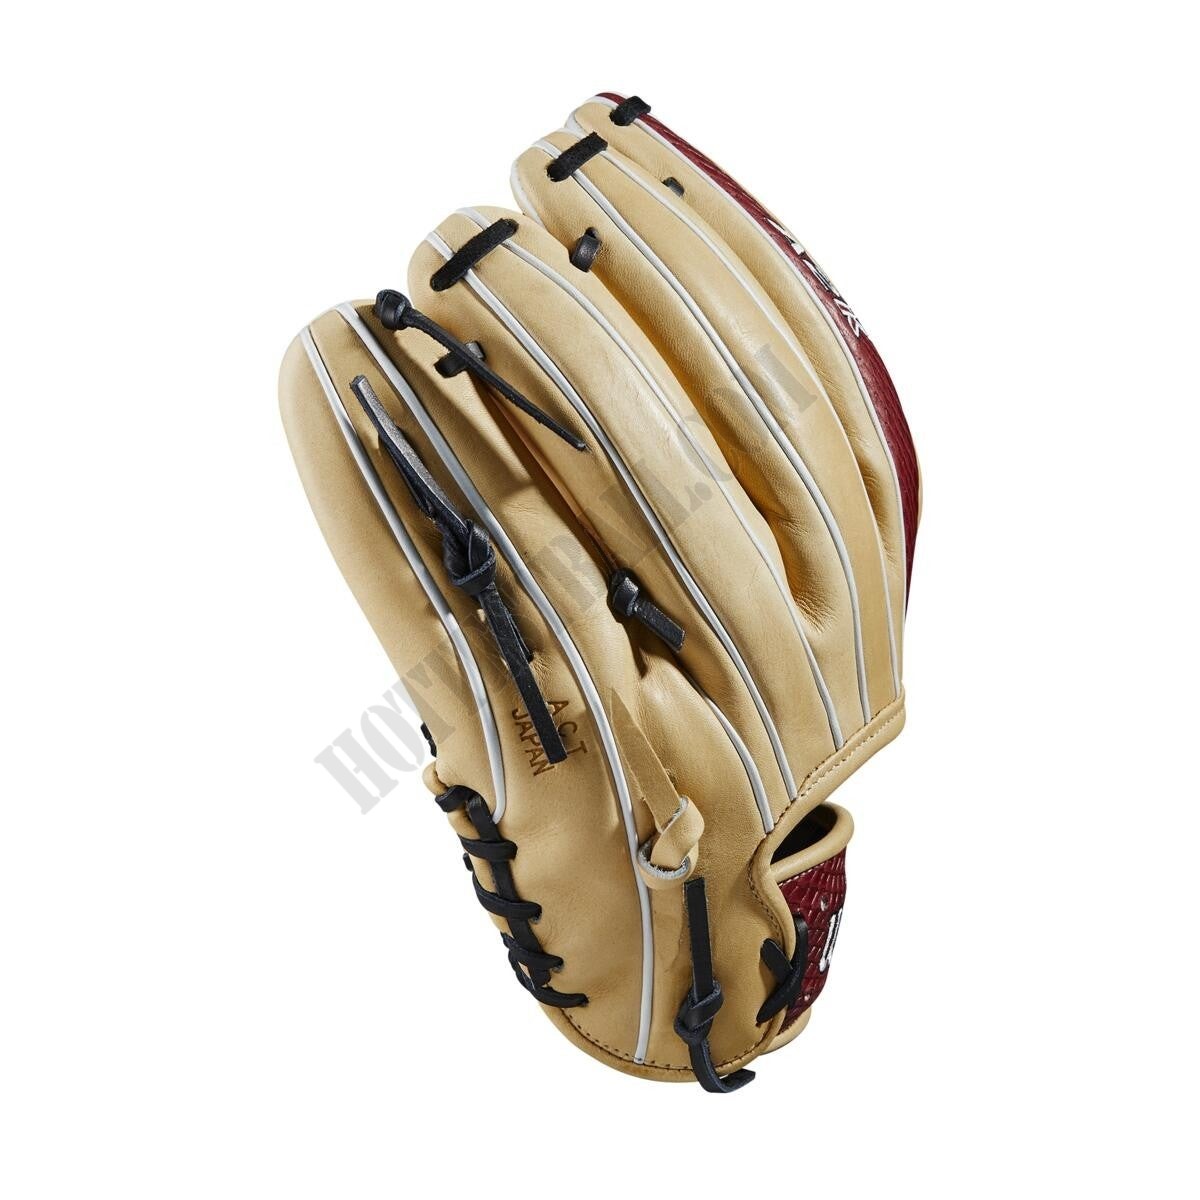 2021 A2K 1786 11.5" Infield Baseball Glove - Limited Edition ● Wilson Promotions - -4